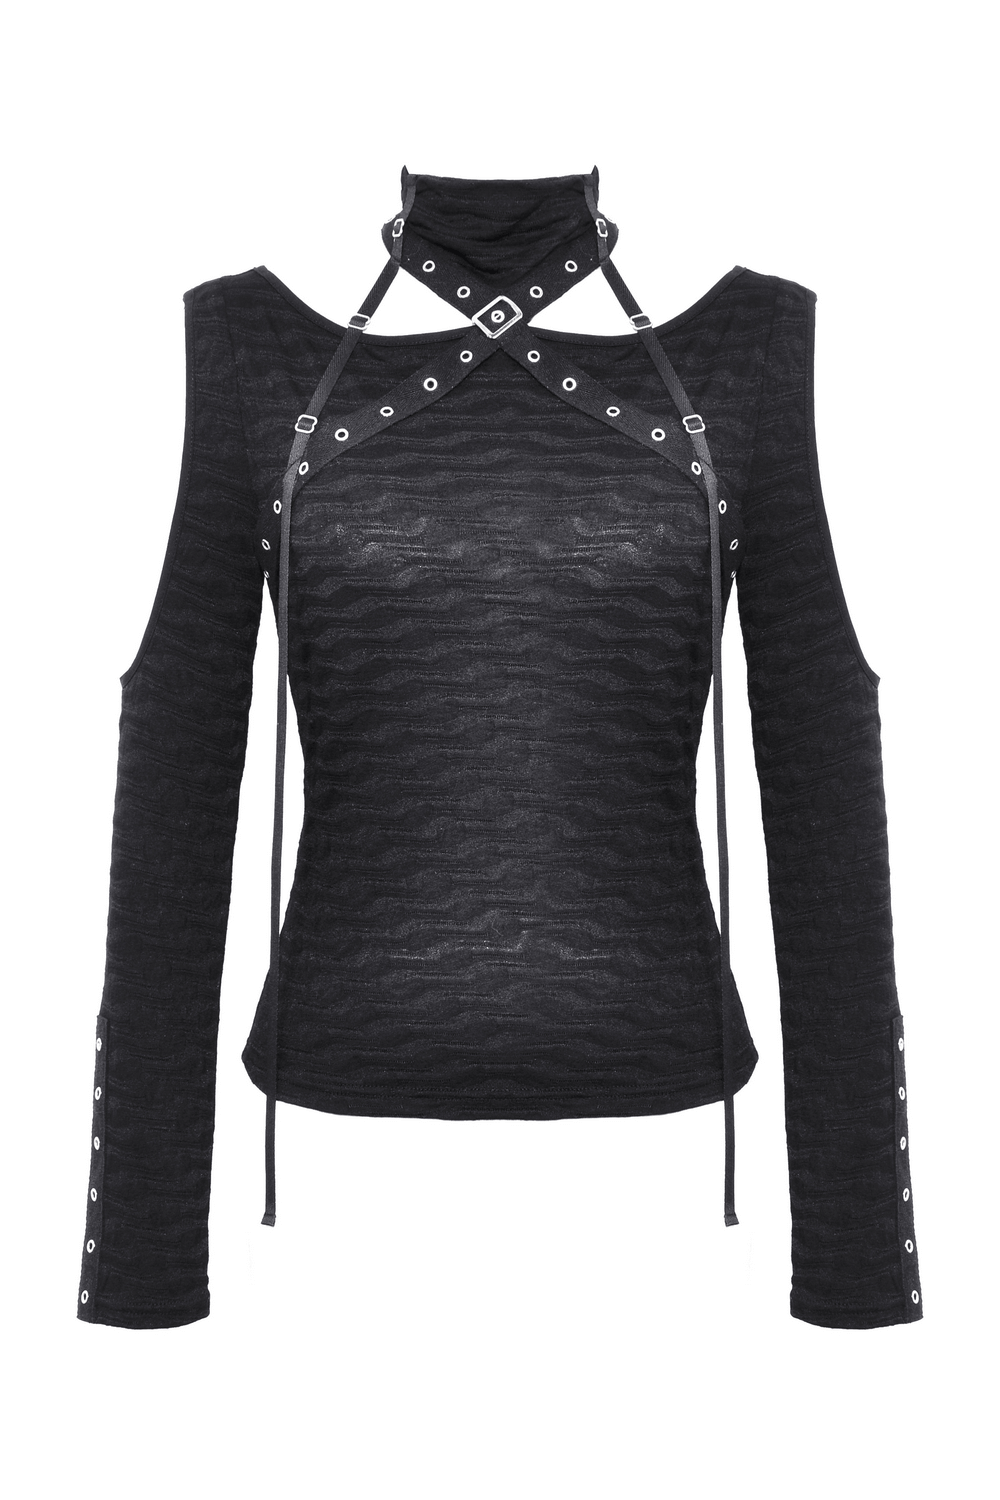 Edgy Cold Shoulder Top with Straps and Zipper of Back